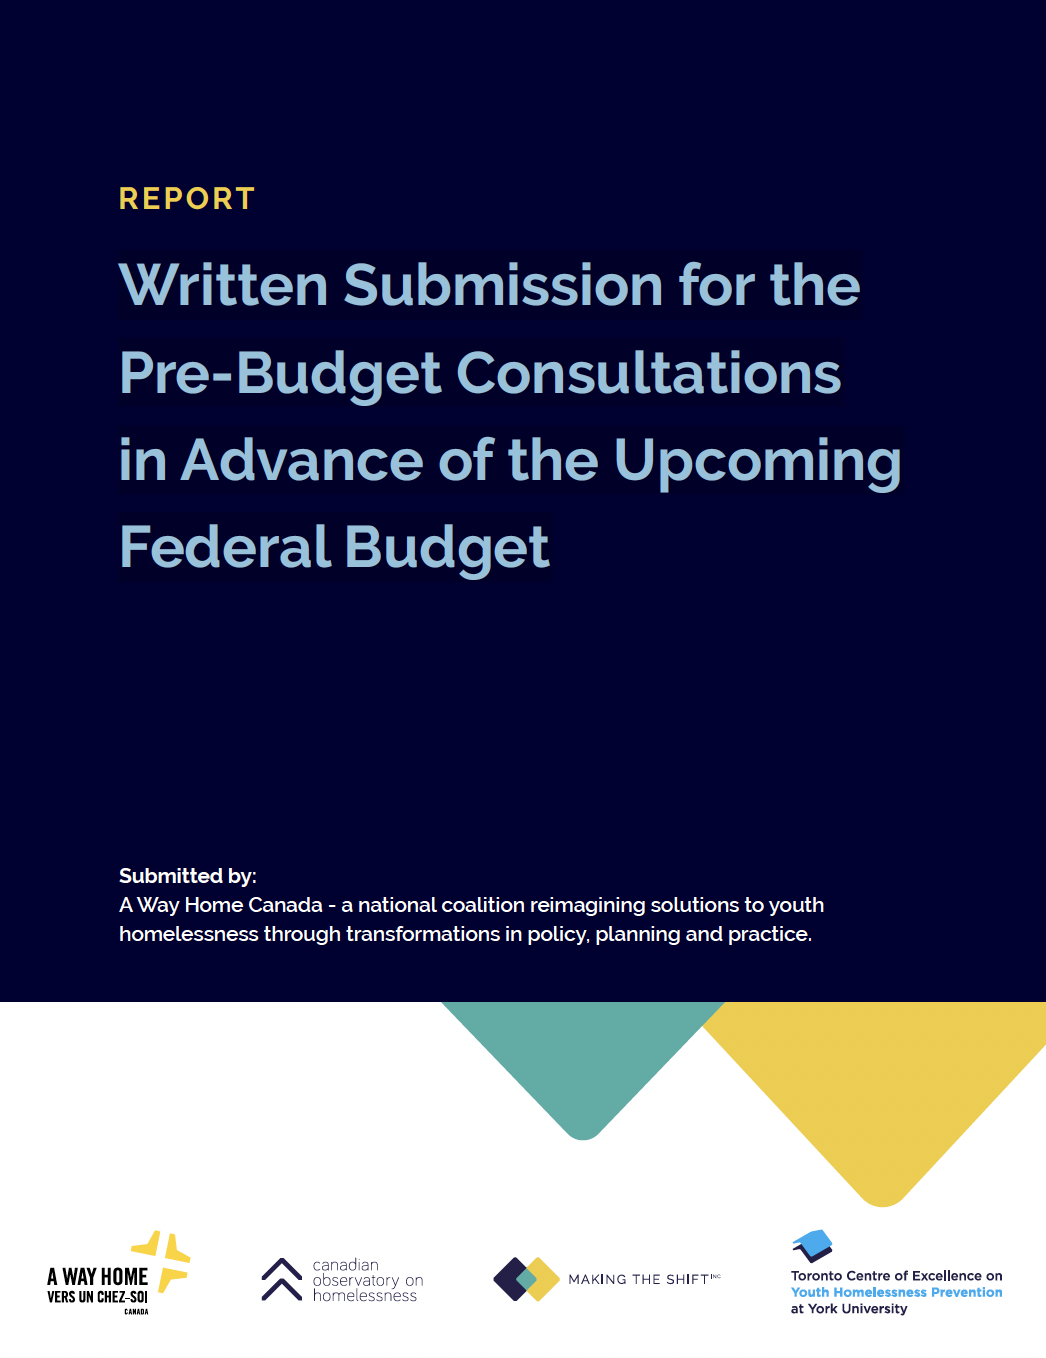 Written Submission for the Pre-Budget Consultations in Advance of the Upcoming Federal Budget The Homeless pic image